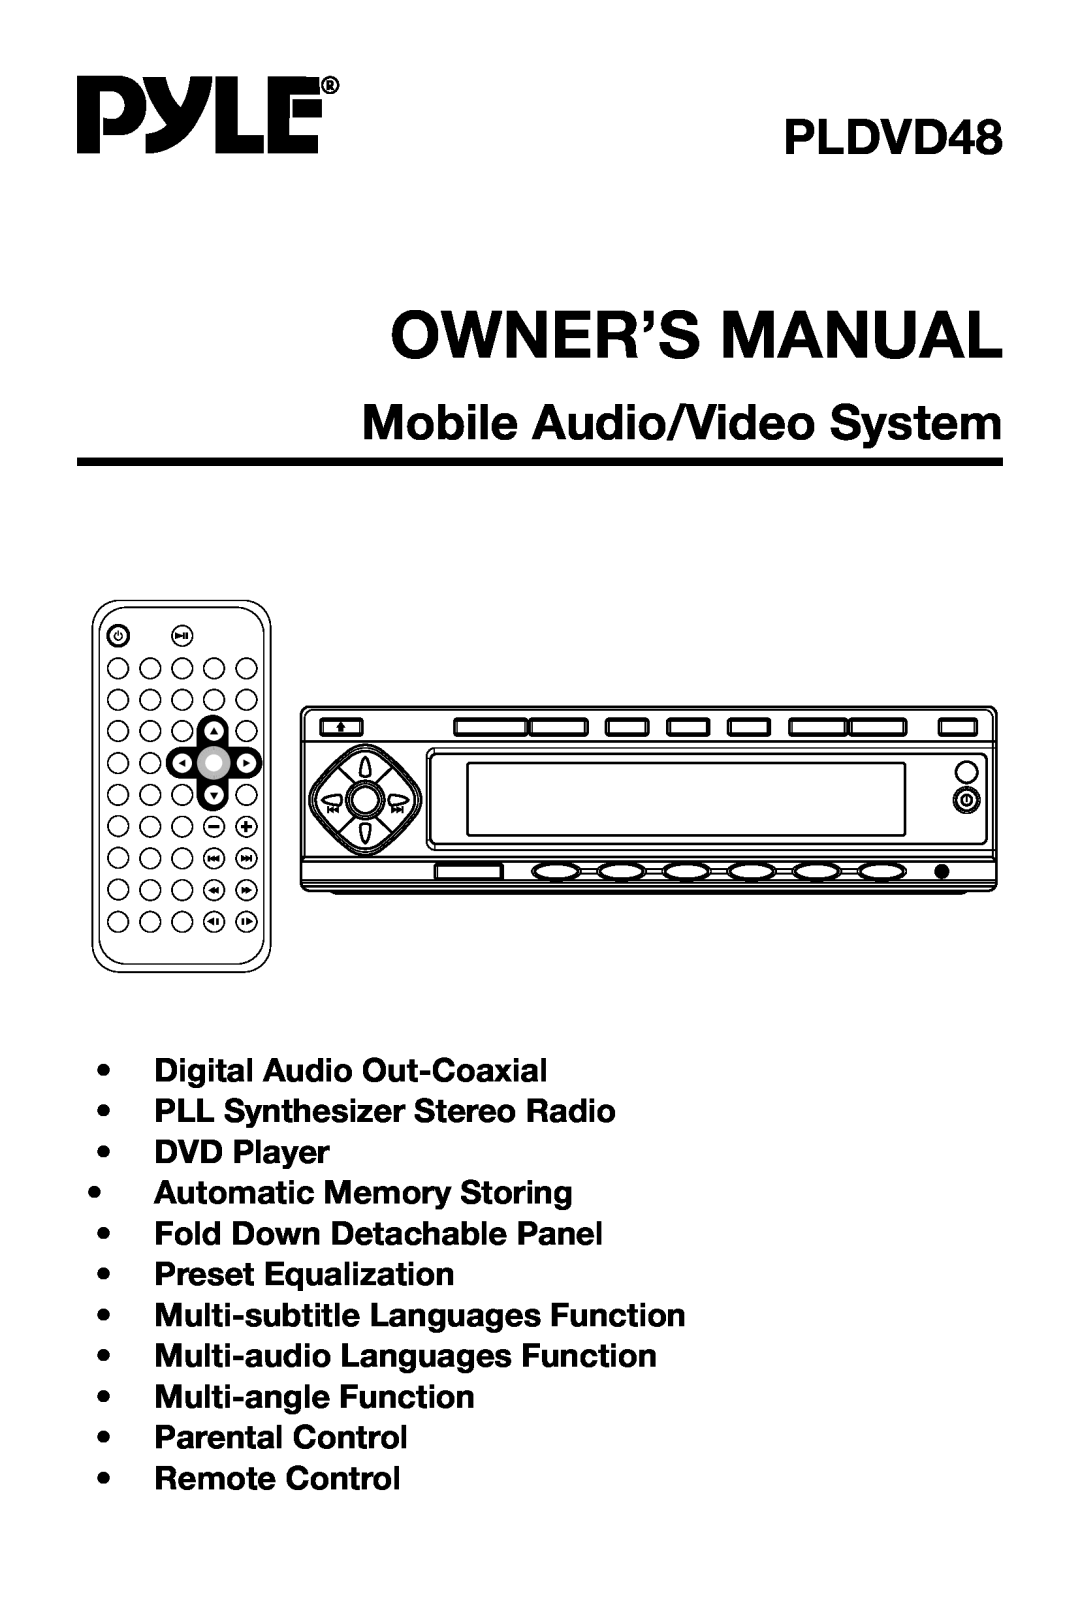 PYLE Audio PLDVD48 owner manual Digital Audio Out-Coaxial PLL Synthesizer Stereo Radio DVD Player, Remote Control 